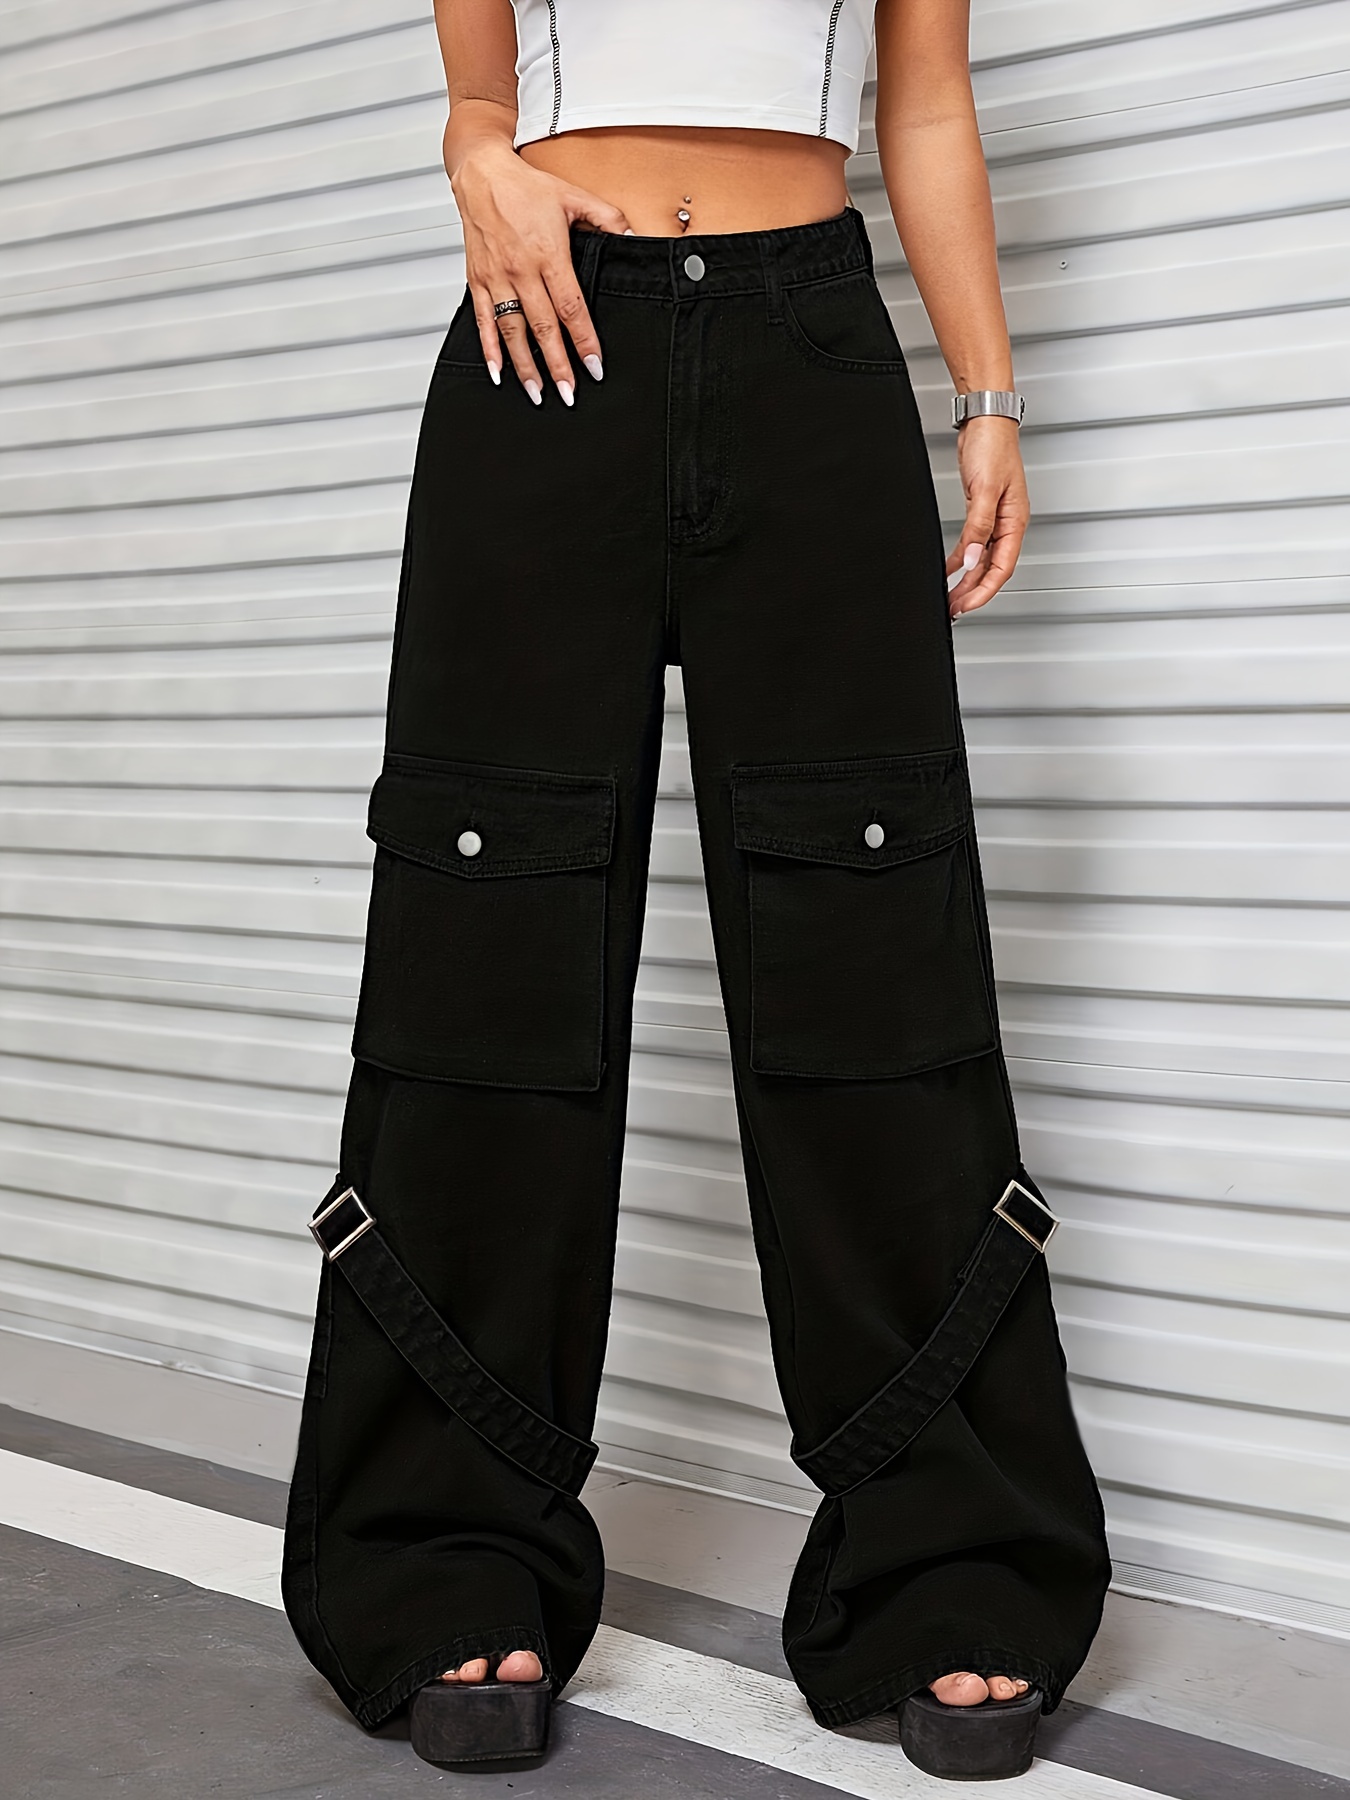 Stylish Cargo Pants with Flap Pockets and Chain Detail